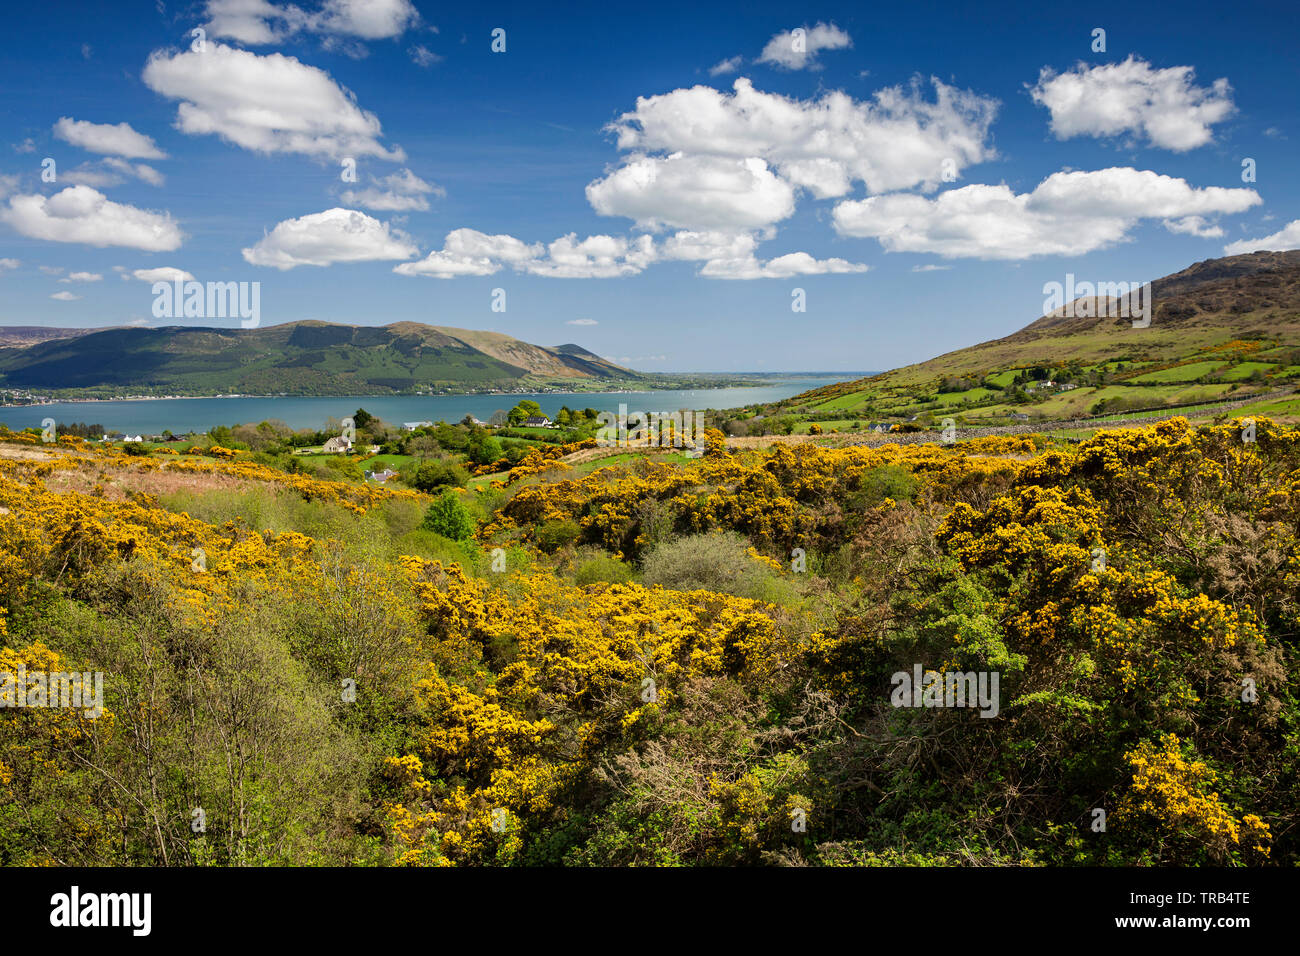 Ireland, Co Louth, Cooley Peninsula, Omeath, Clarmontpass Bridge, view down to Carlingford Lough and Mourne Mountains Stock Photo